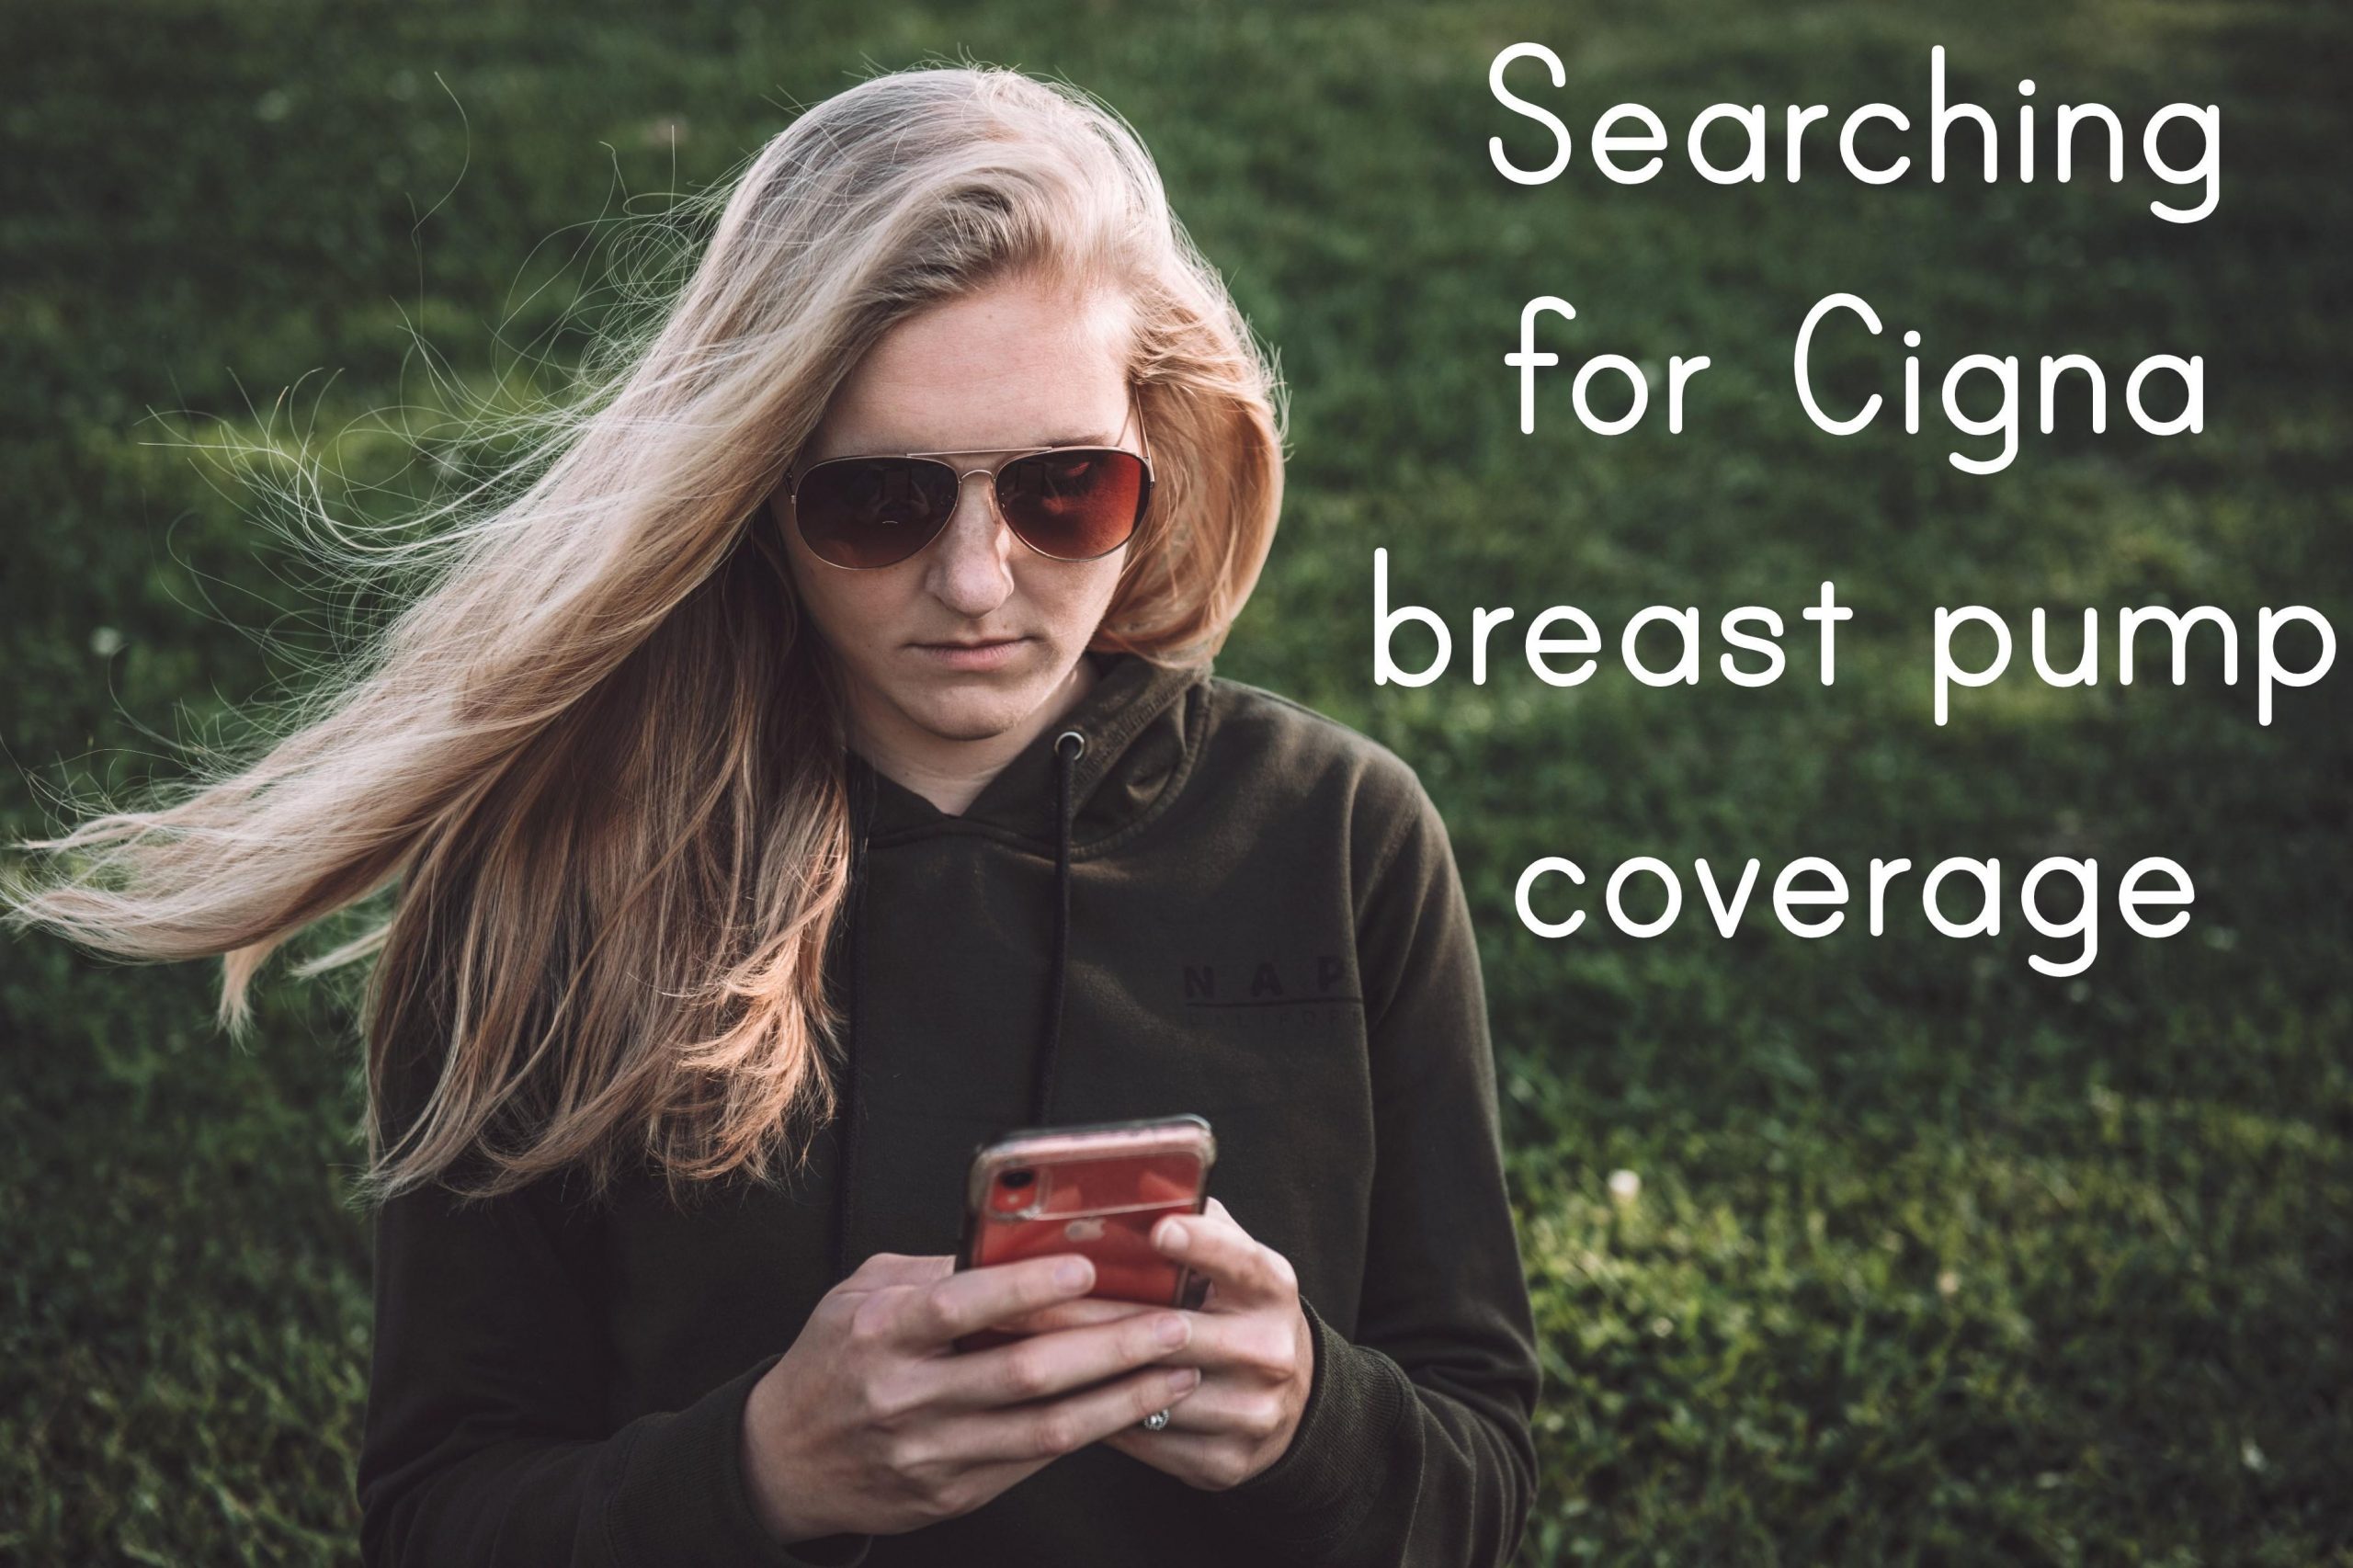 Searching for Cigna breast pump coverage